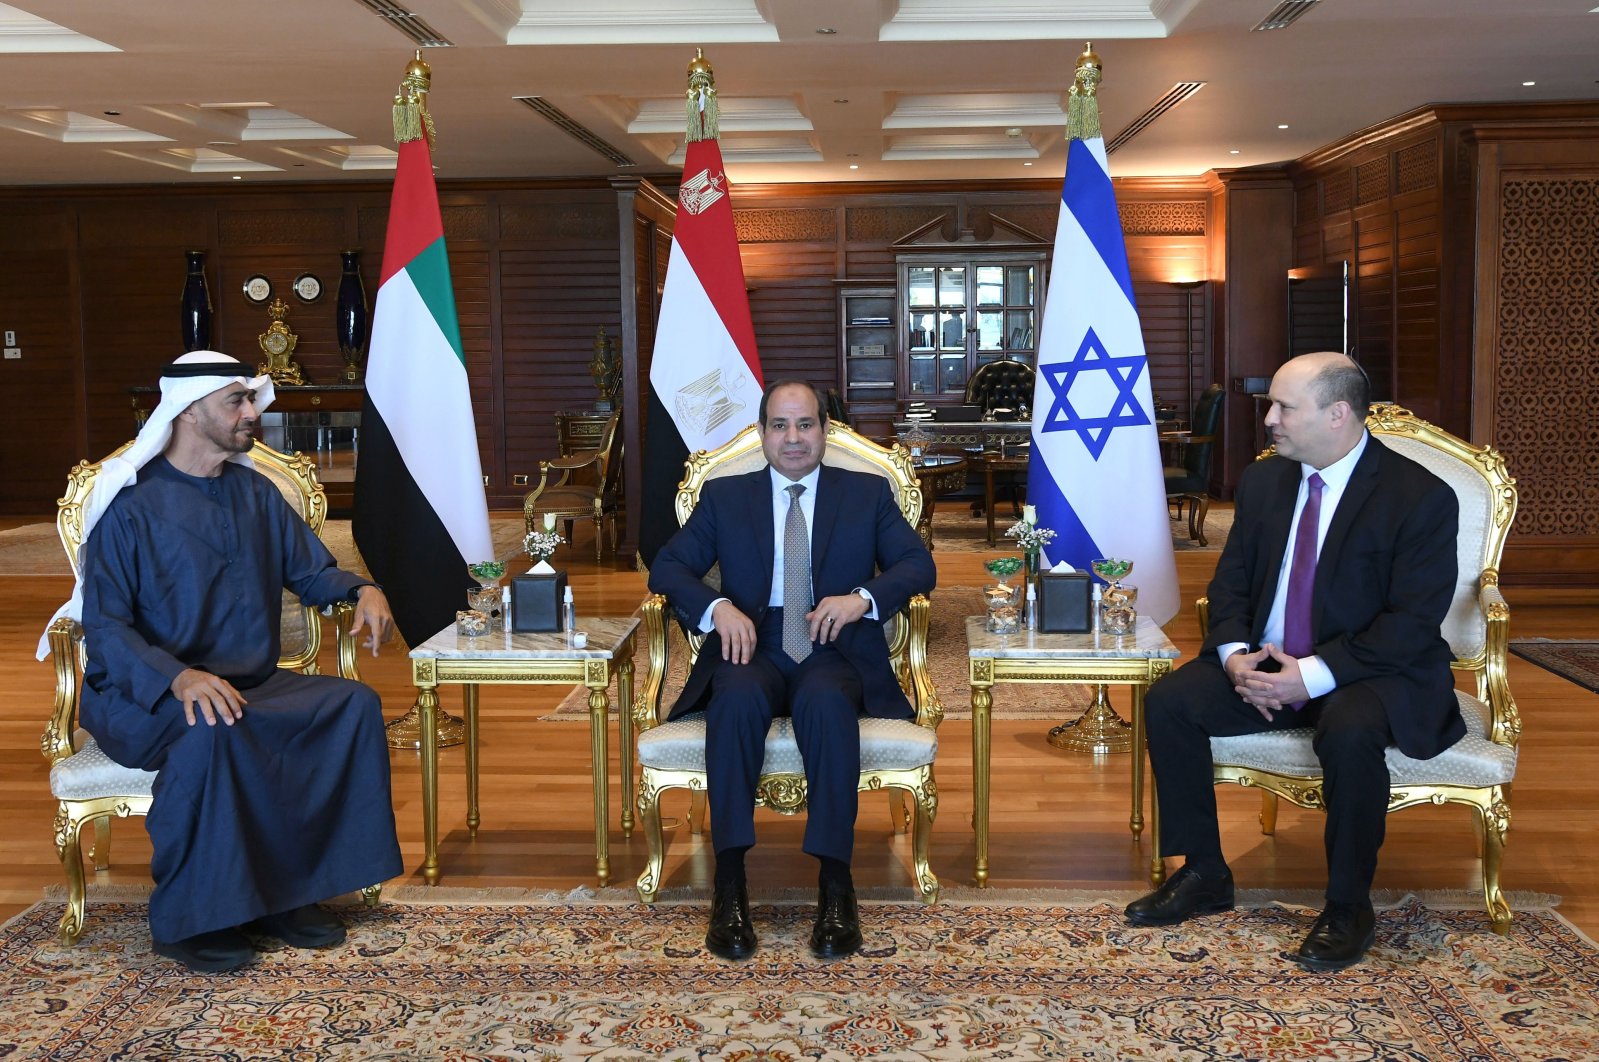 A handout photo made available by the Egyptian presidency shows Egyptian President Abdel Fattah el-Sisi (C), Abu Dhabi Crown Prince Mohammed bin Zayed (L) and Israeli Prime Minister Naftali Bennett during their meeting in Sharm el-Sheikh, Egypt, March 22, 2022. (EPA Photo)